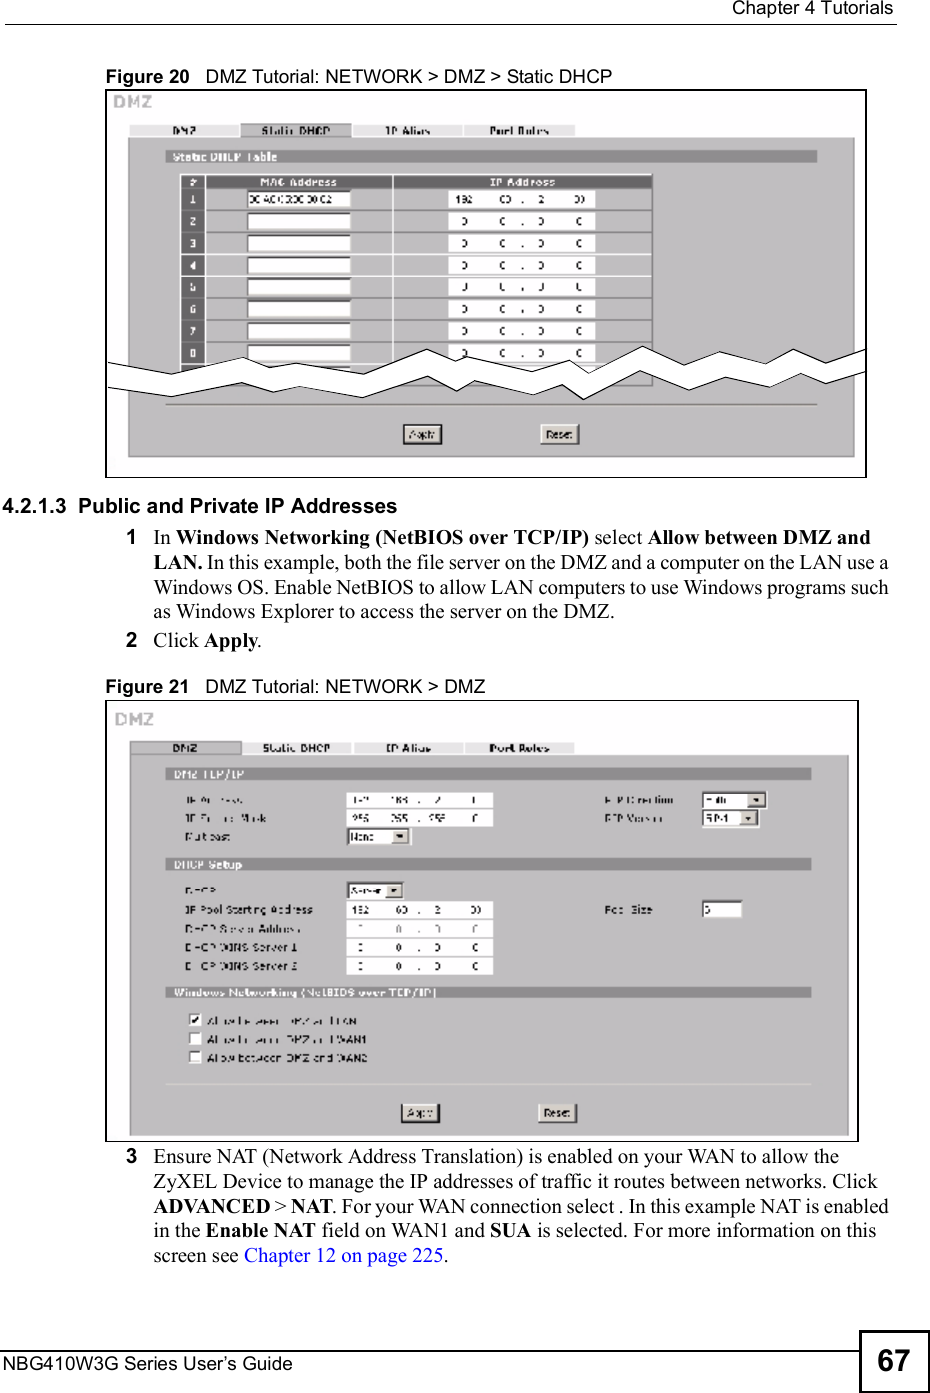  Chapter 4TutorialsNBG410W3G Series User s Guide 67Figure 20   DMZ Tutorial: NETWORK &gt; DMZ &gt; Static DHCP 4.2.1.3  Public and Private IP Addresses1In Windows Networking (NetBIOS over TCP/IP) select Allow between DMZ and LAN. In this example, both the file server on the DMZ and a computer on the LAN use a Windows OS. Enable NetBIOS to allow LAN computers to use Windows programs such as Windows Explorer to access the server on the DMZ.2Click Apply.Figure 21   DMZ Tutorial: NETWORK &gt; DMZ 3Ensure NAT (Network Address Translation) is enabled on your WAN to allow the ZyXEL Device to manage the IP addresses of traffic it routes between networks. Click ADVANCED &gt; NAT. For your WAN connection select . In this example NAT is enabled in the Enable NAT field on WAN1 and SUA is selected. For more information on this screen see Chapter 12 on page 225.